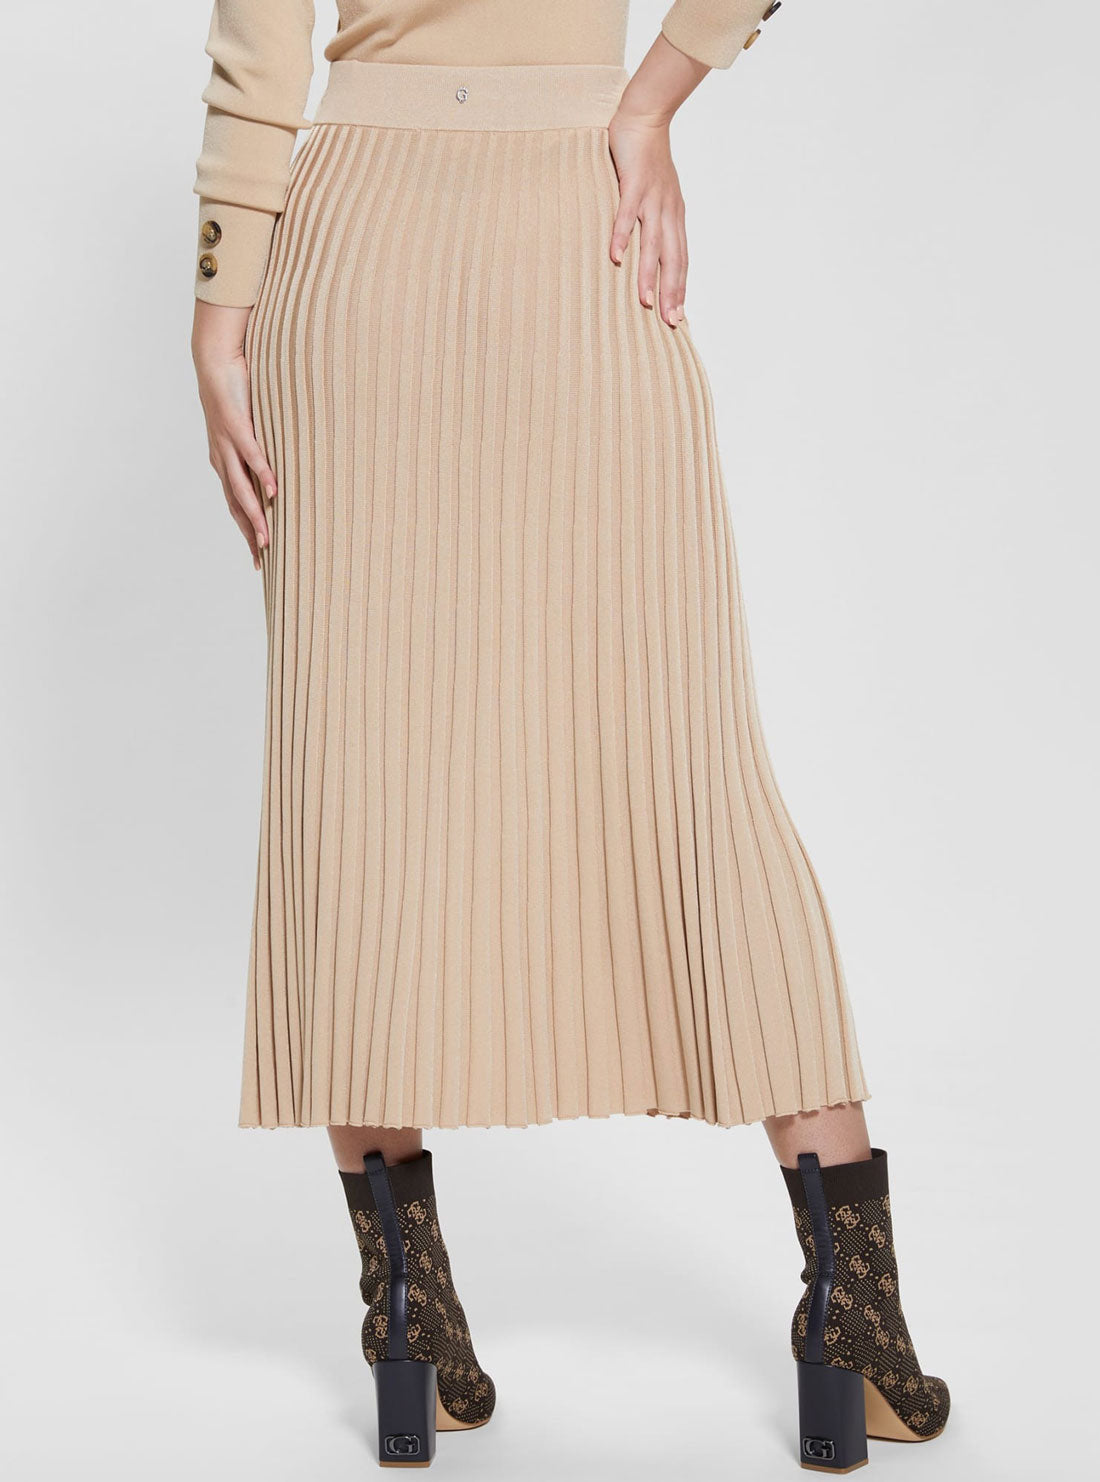 GUESS Beige Shopie Pleated Knit Skirt back view